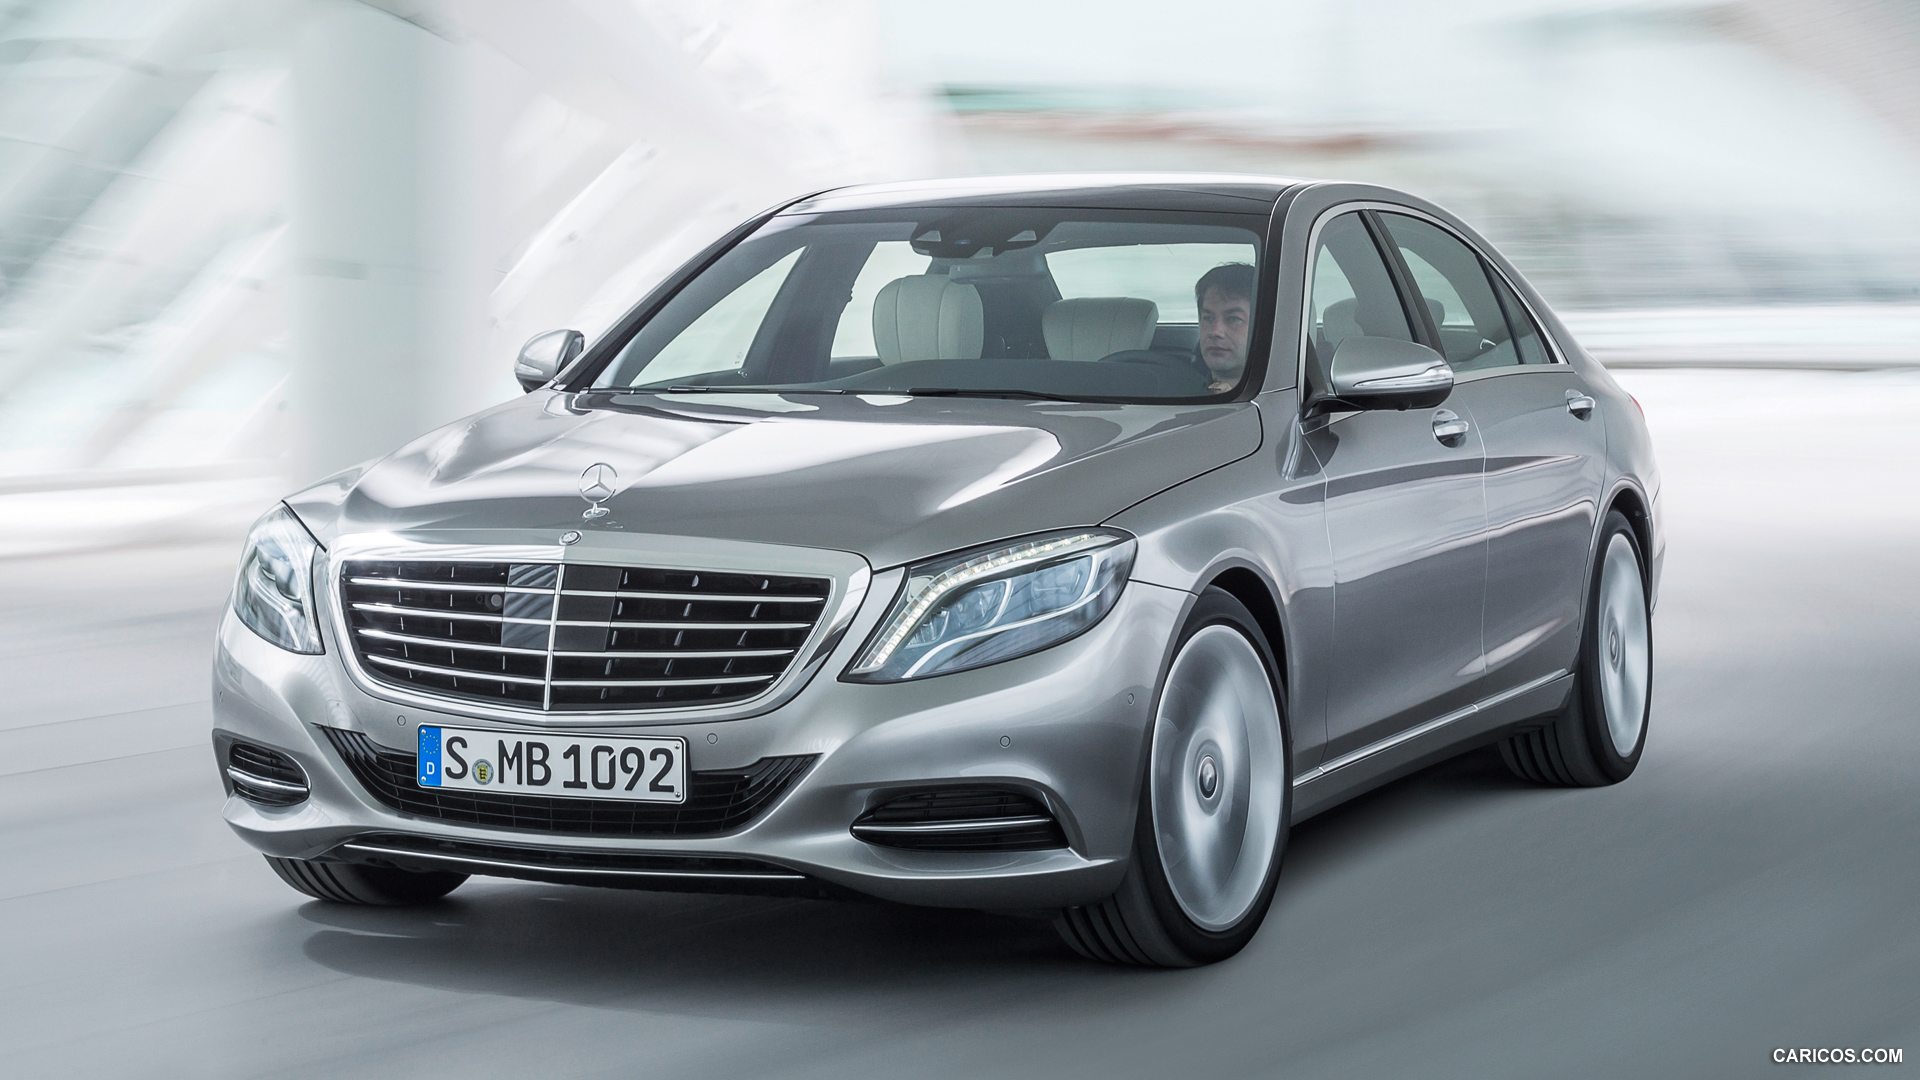 2014 Mercedes-Benz S-Class S400 HYBRID - Front, #9 of 138